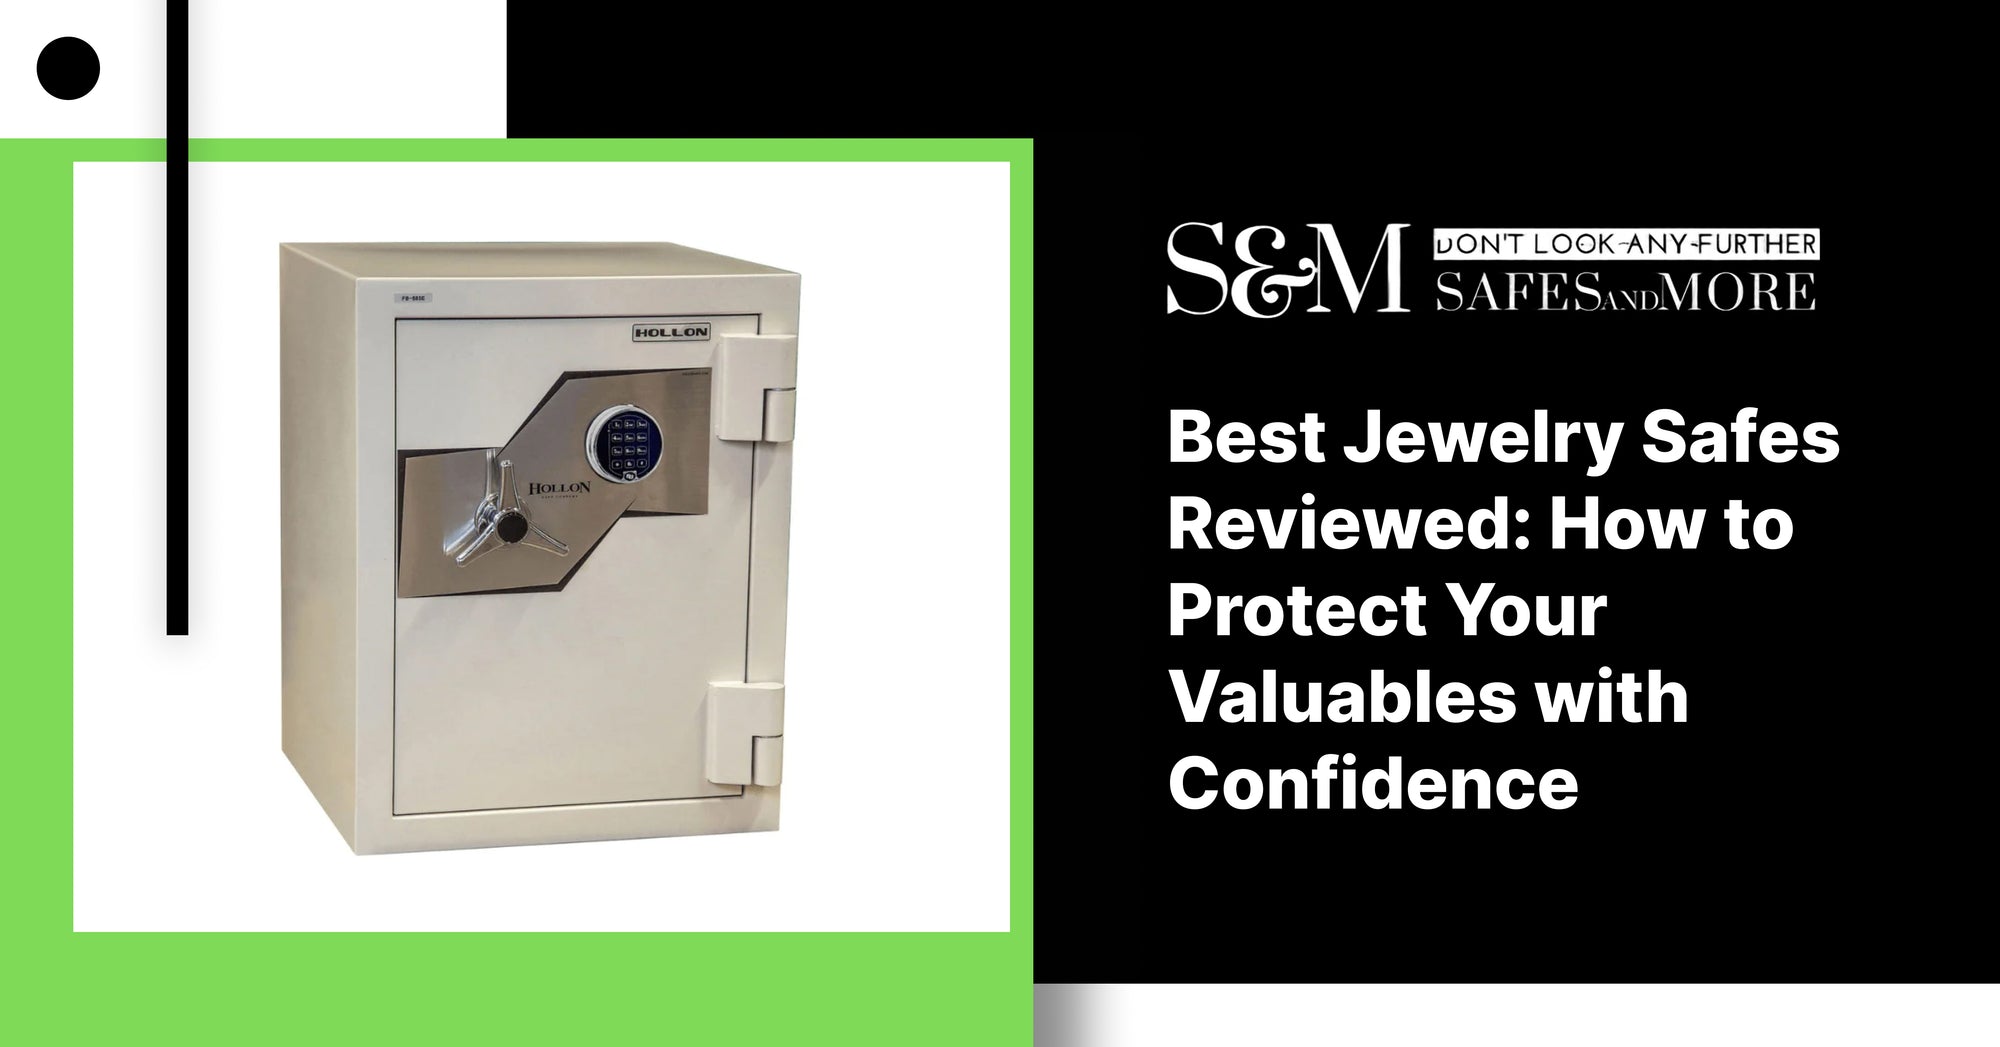 Best Jewelry Safes Reviewed: How to Protect Your Valuables with Confidence